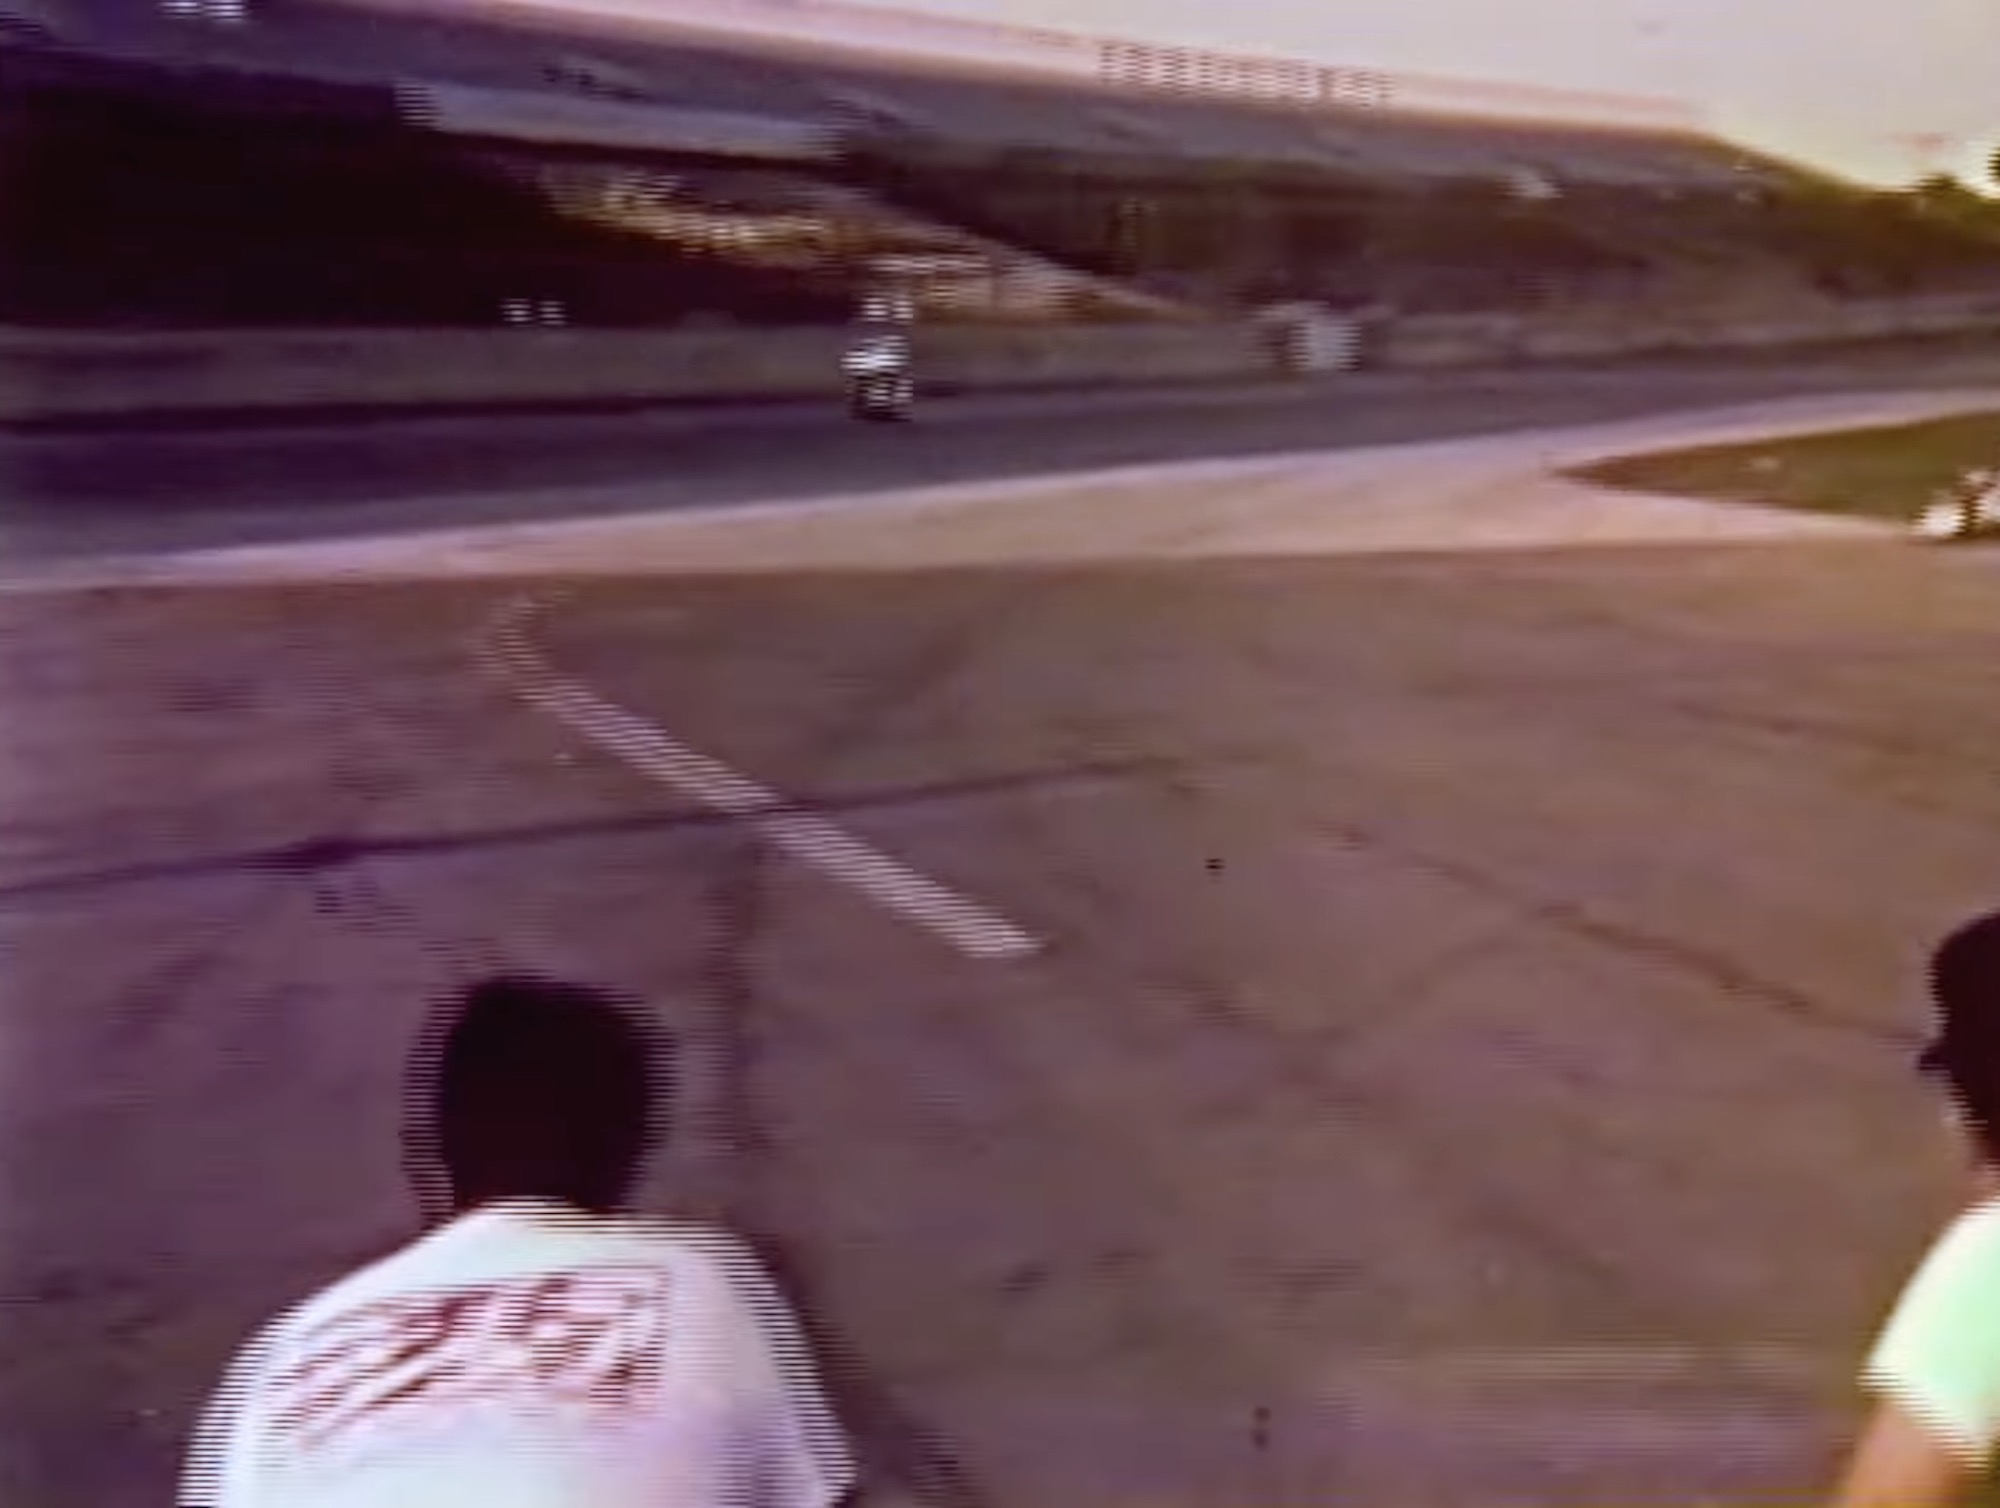 Kawasaki's Z1 900 at the Daytona Speedway of 1972, blasting through a new record. Media sourced from Youtube.